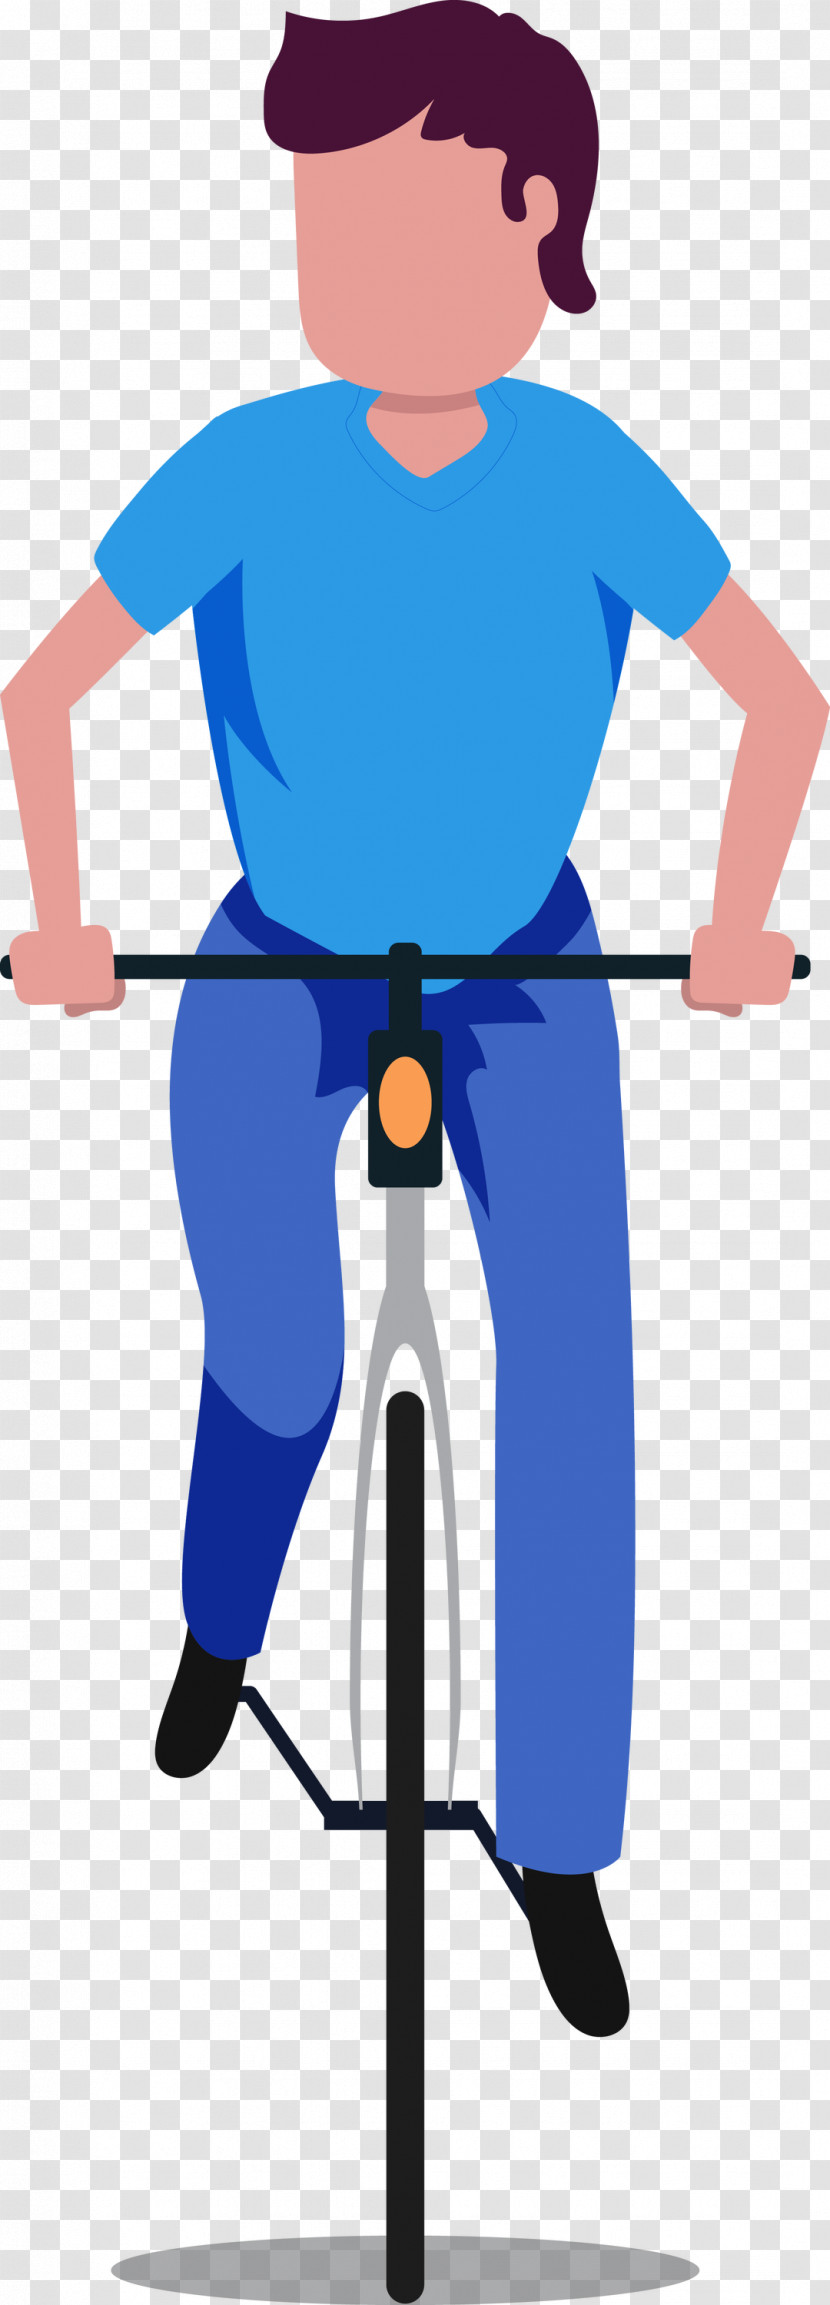 Standing Solid Swing+hit Cleanliness Transparent PNG